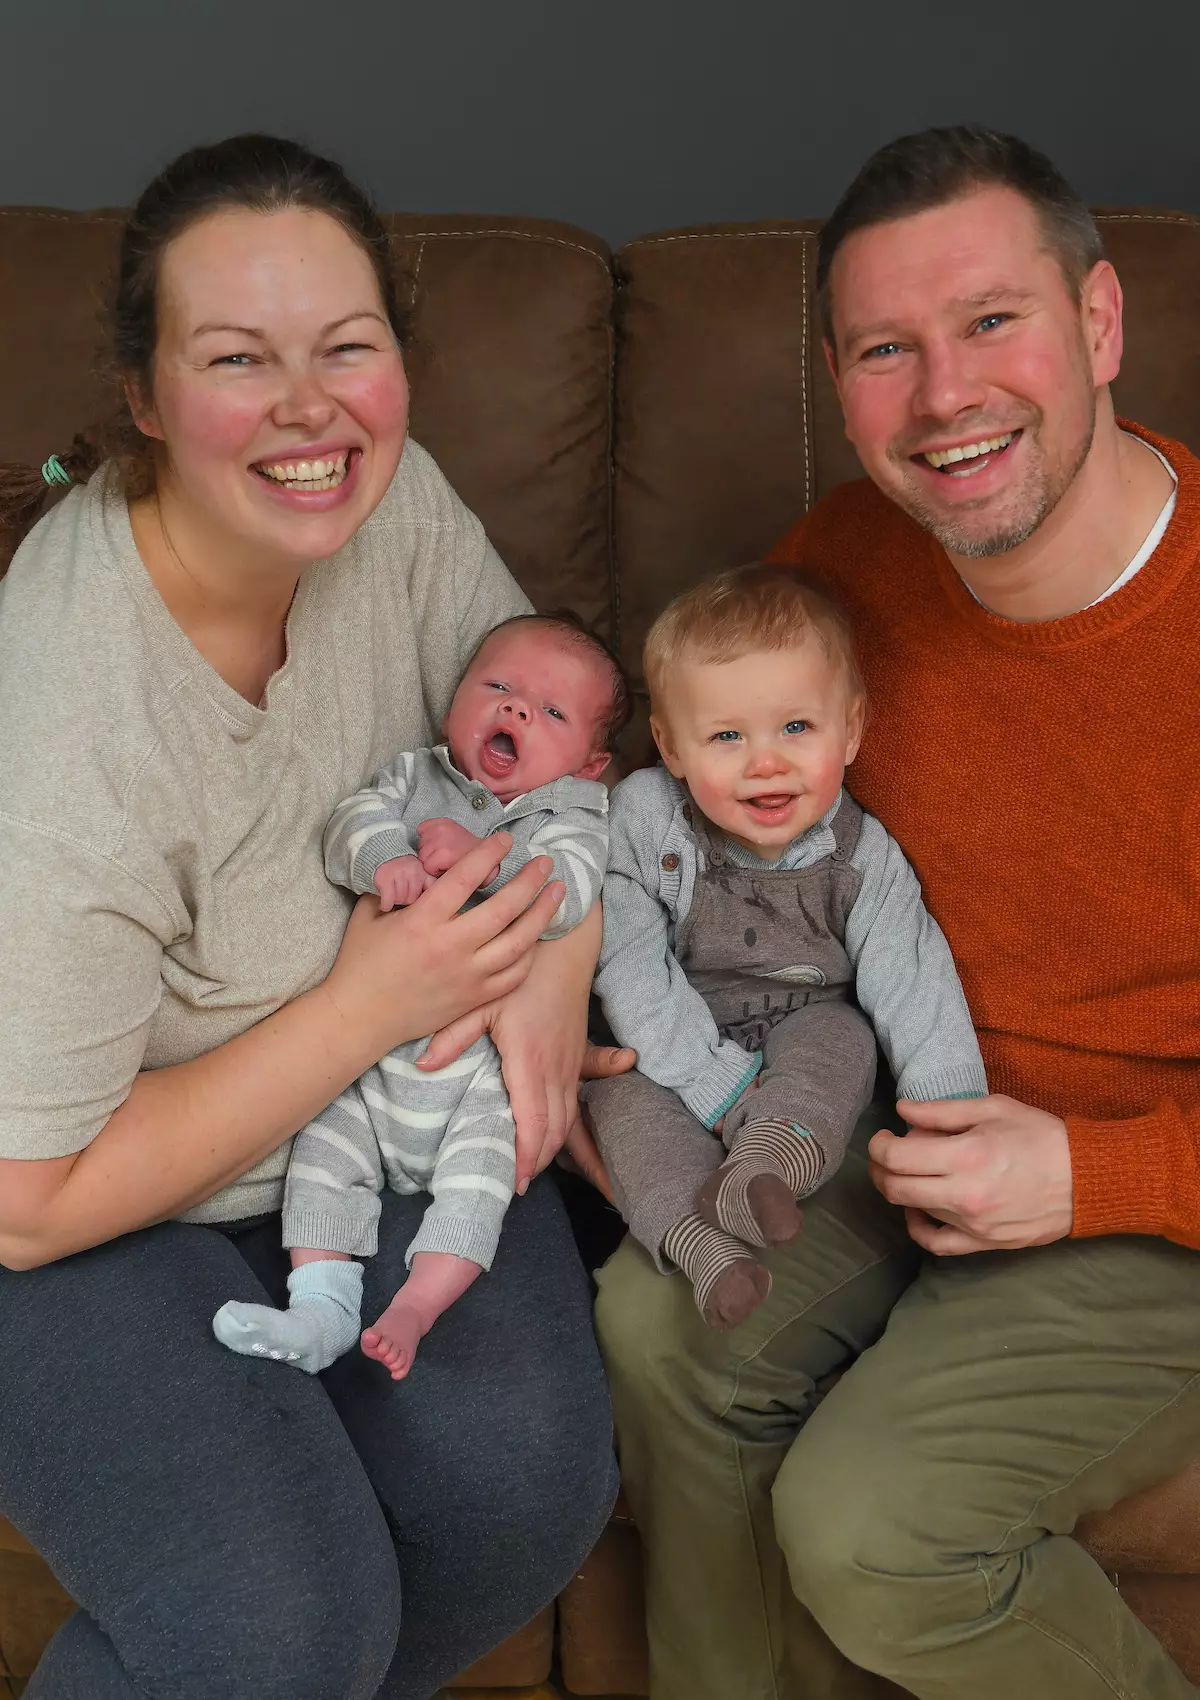 Hannah and Matthew with their children, Bruce and baby Jasper.